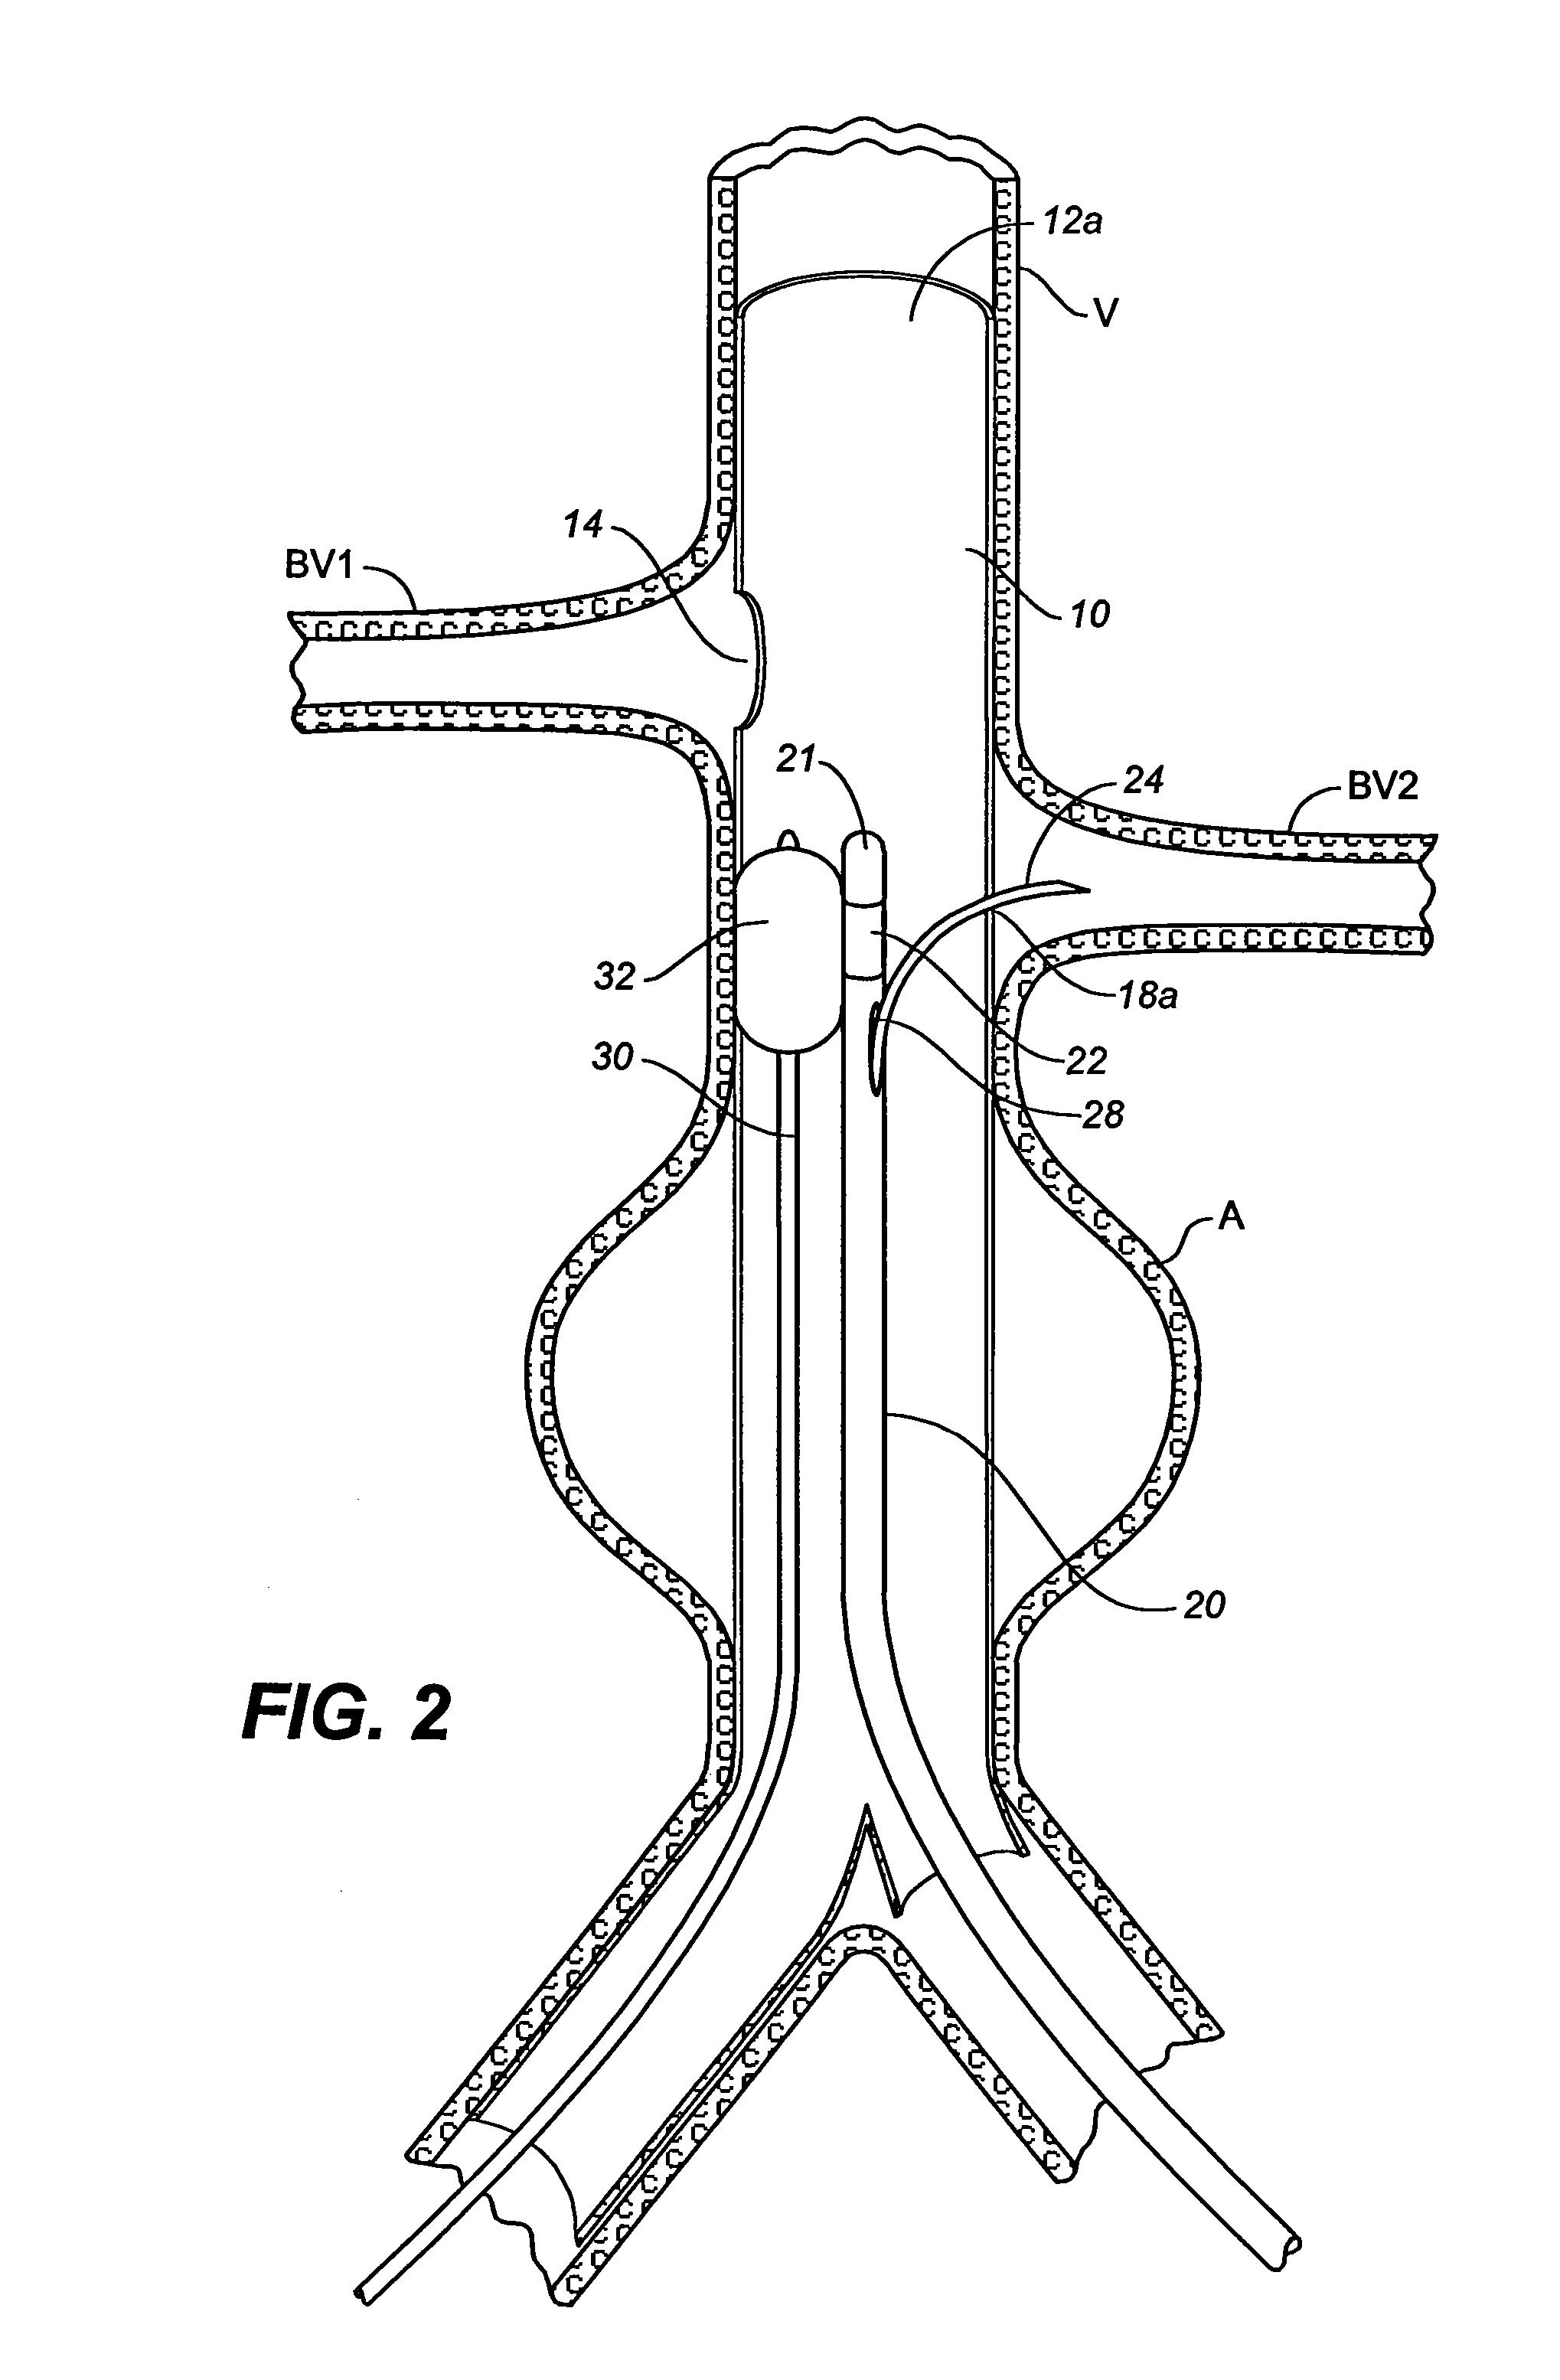 Multiple Branch Tubular Prosthesis and Methods